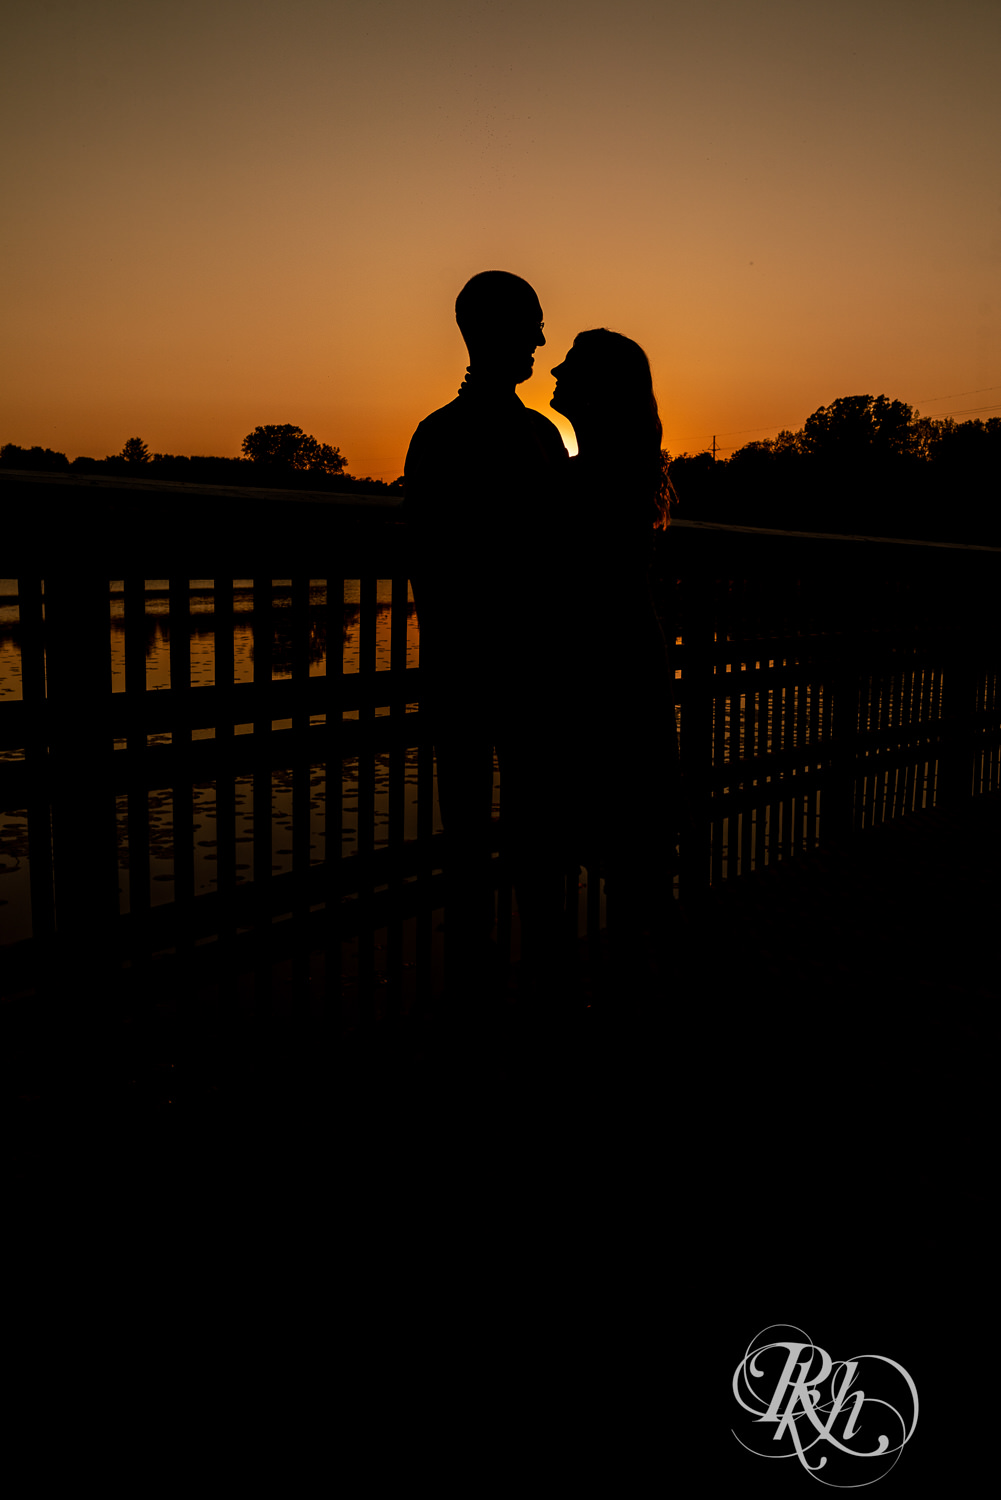 Man in white shirt and blonde woman in white dress and denim kiss in silhouette at sunset in Lebanon Hills Regional Park in Eagan, Minnesota.